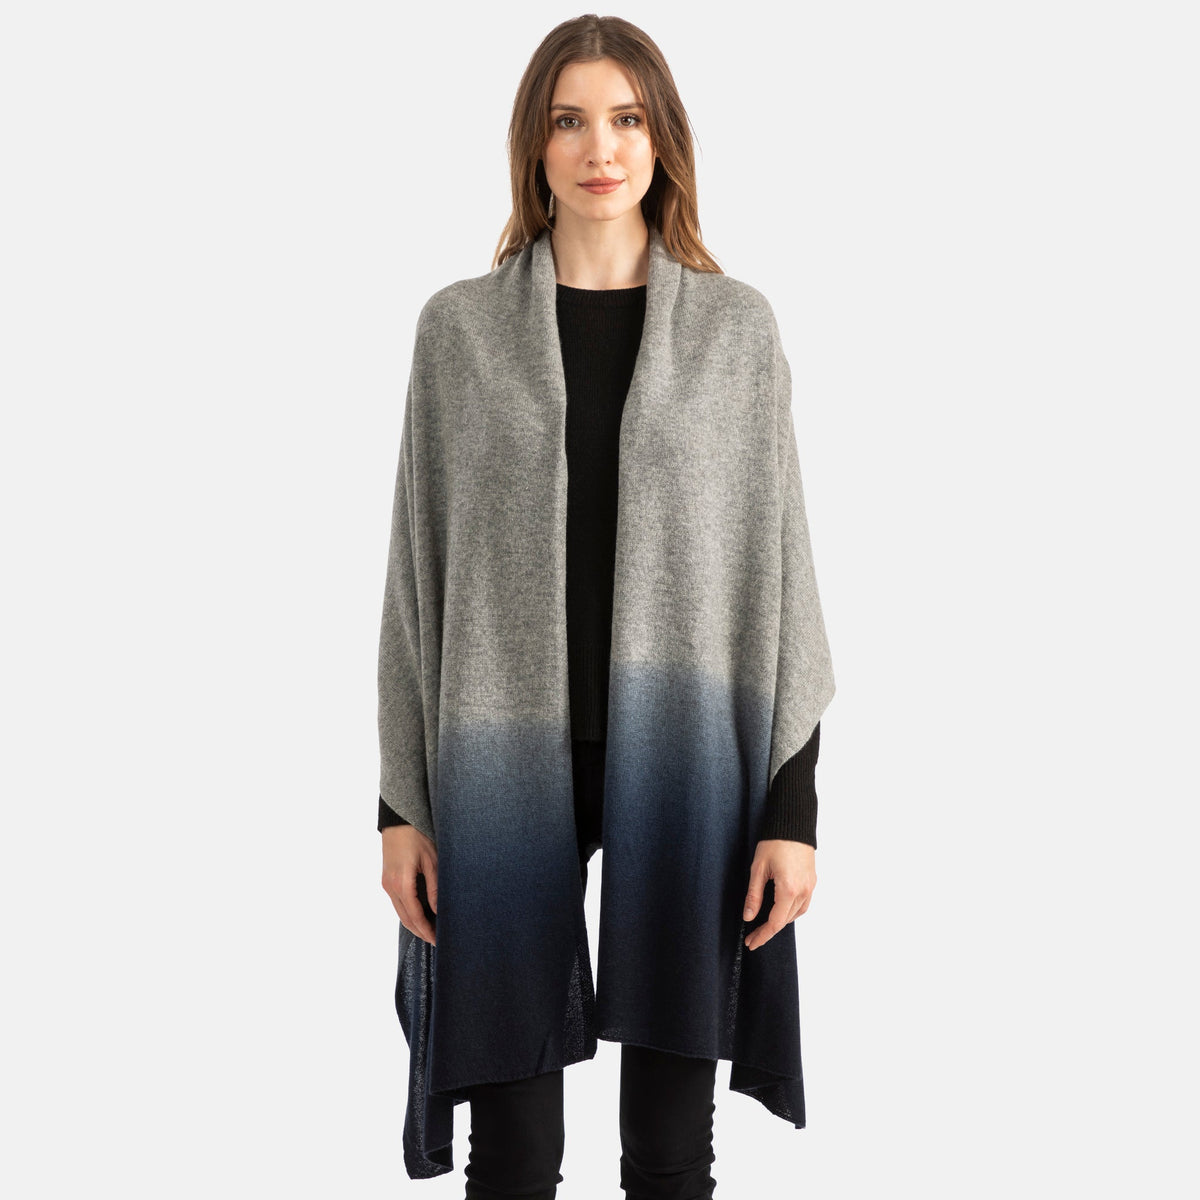 Picture of a woman wearing an oversized knitted cashmere travel wrap or scarf with an ombre pattern in dark green and black and burgundy.  [Grey/Navy]